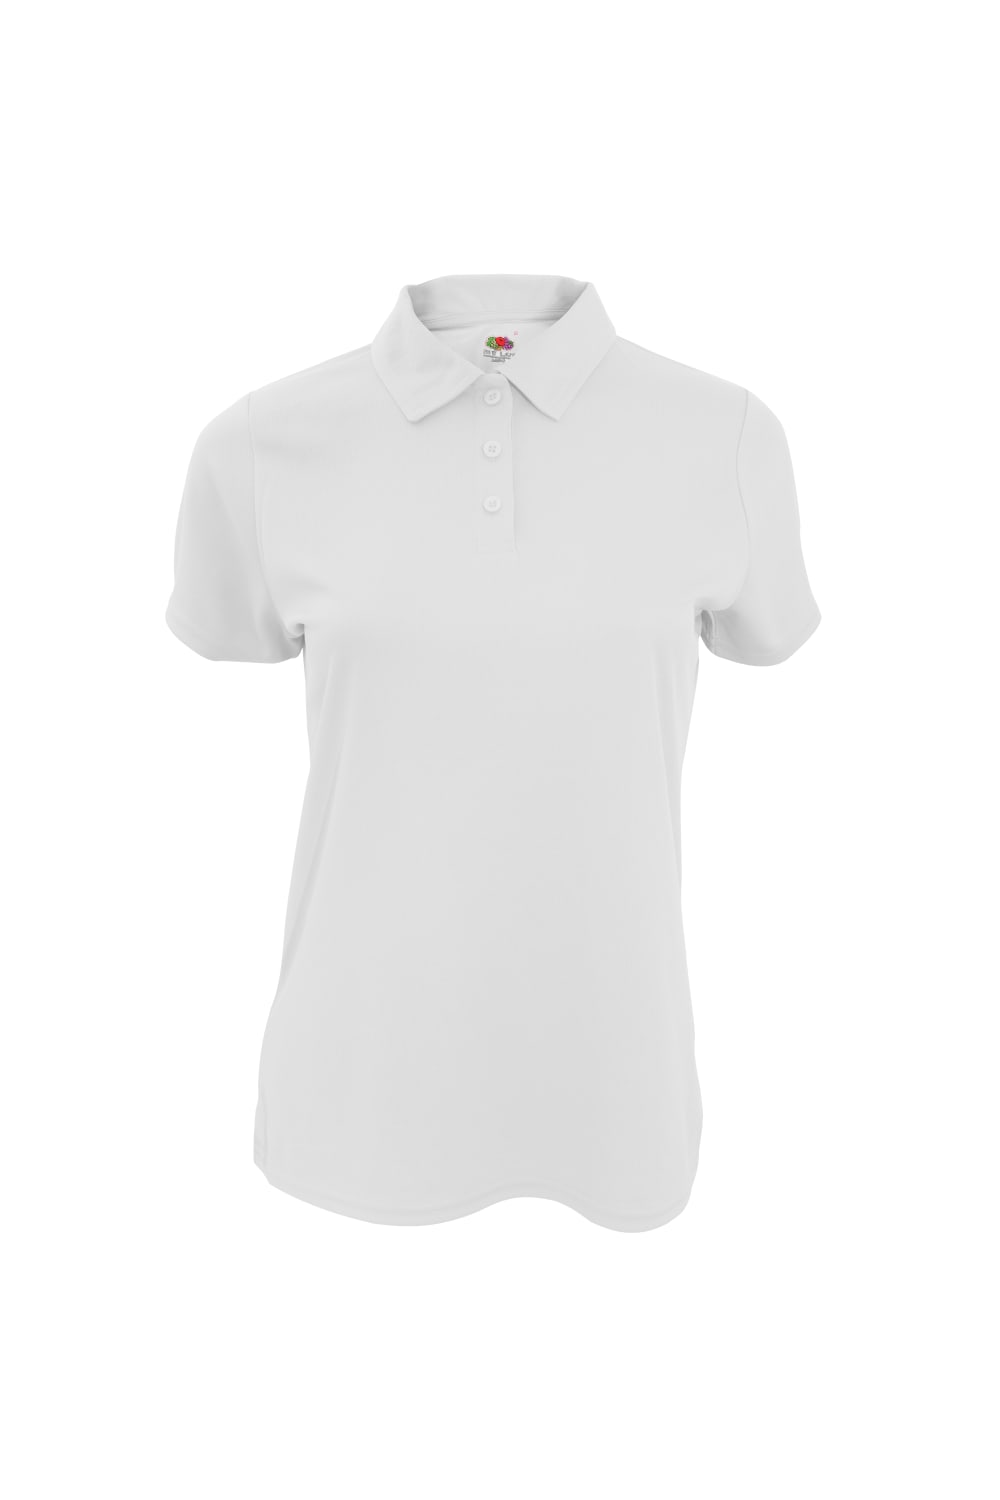 Womens/Ladies Moisture Wicking Lady-Fit Performance Polo Shirt - White